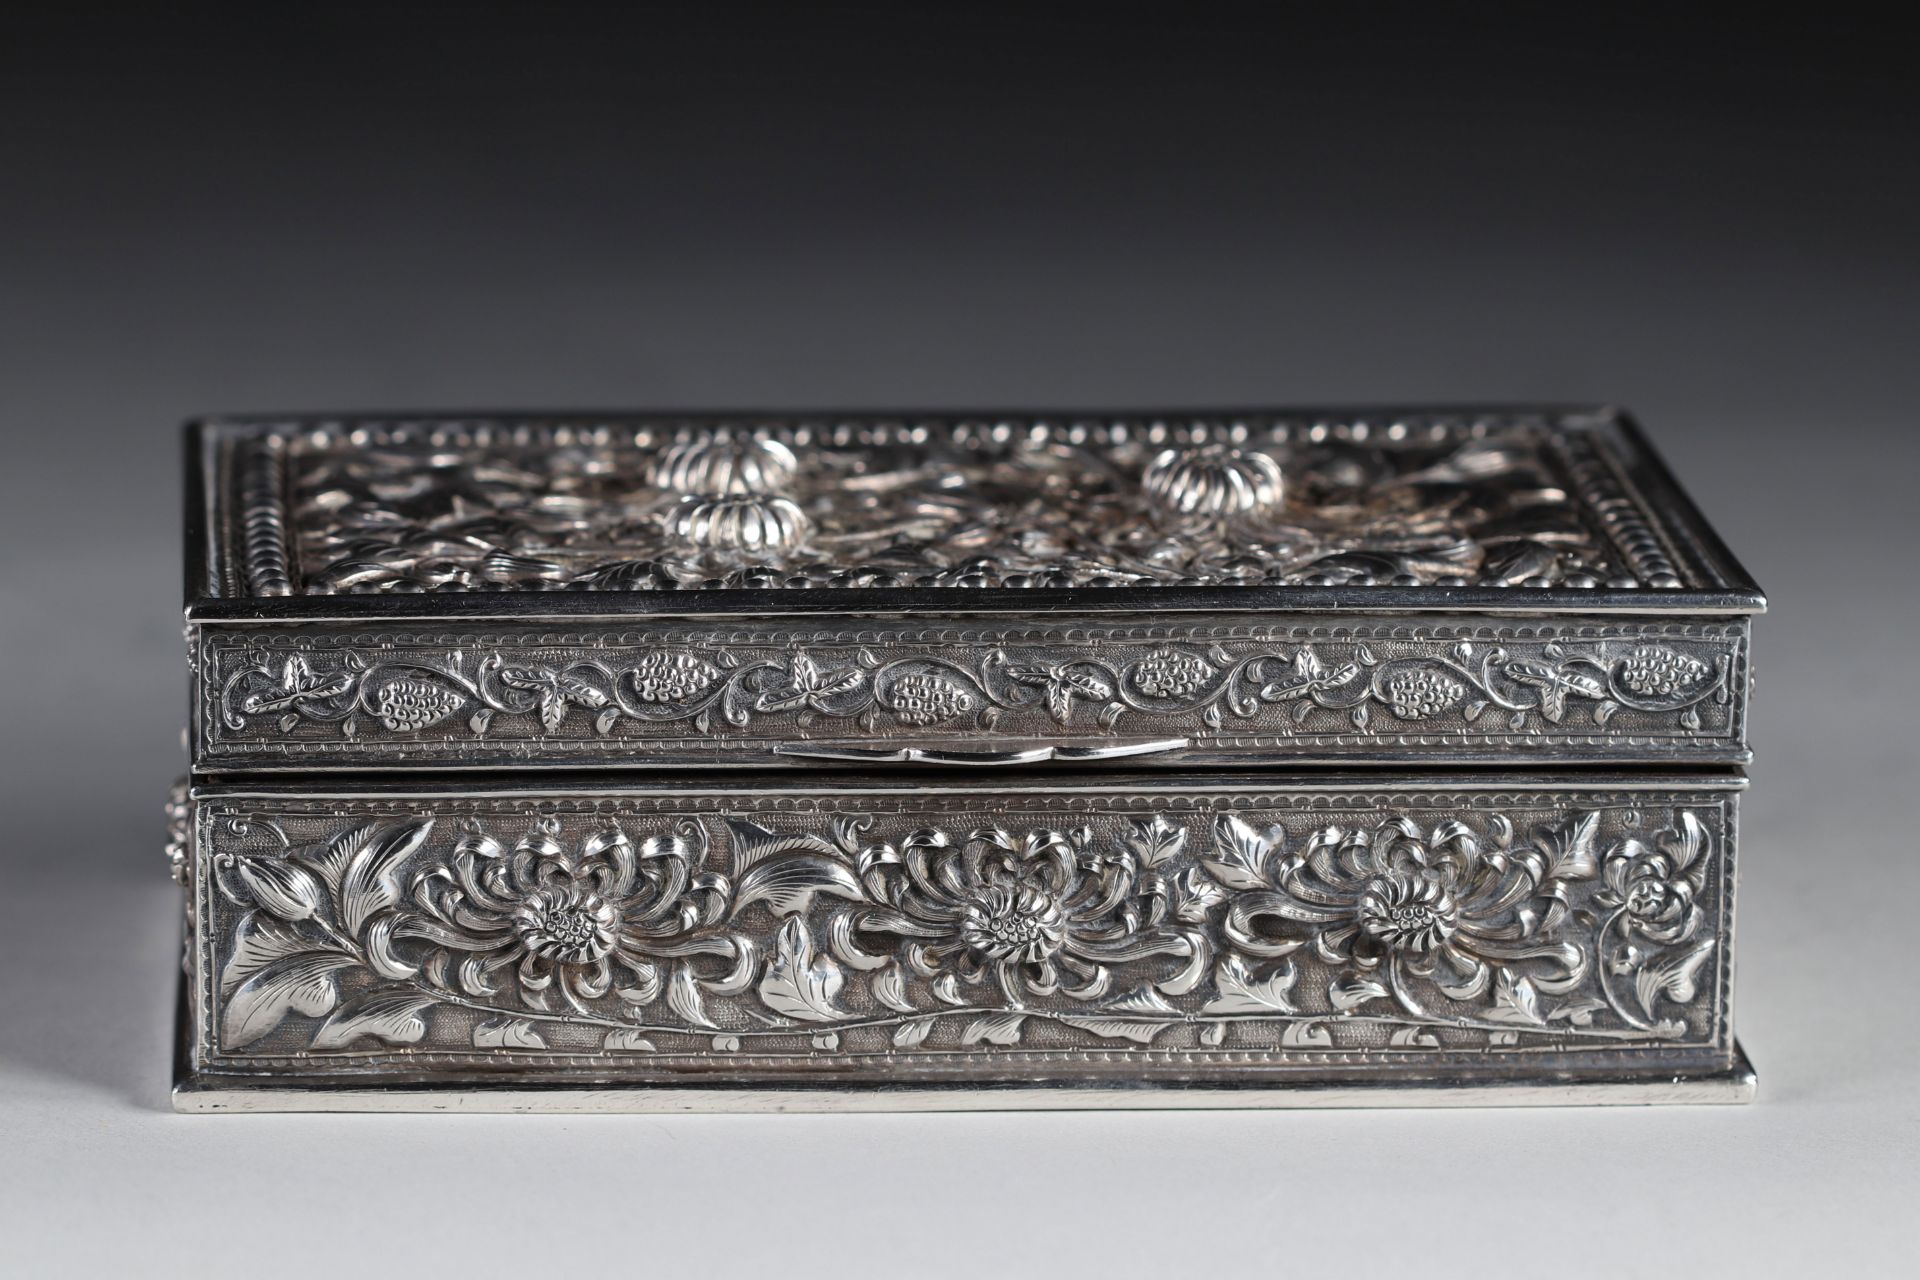 silver box with high relief floral decoration, 19th century China.